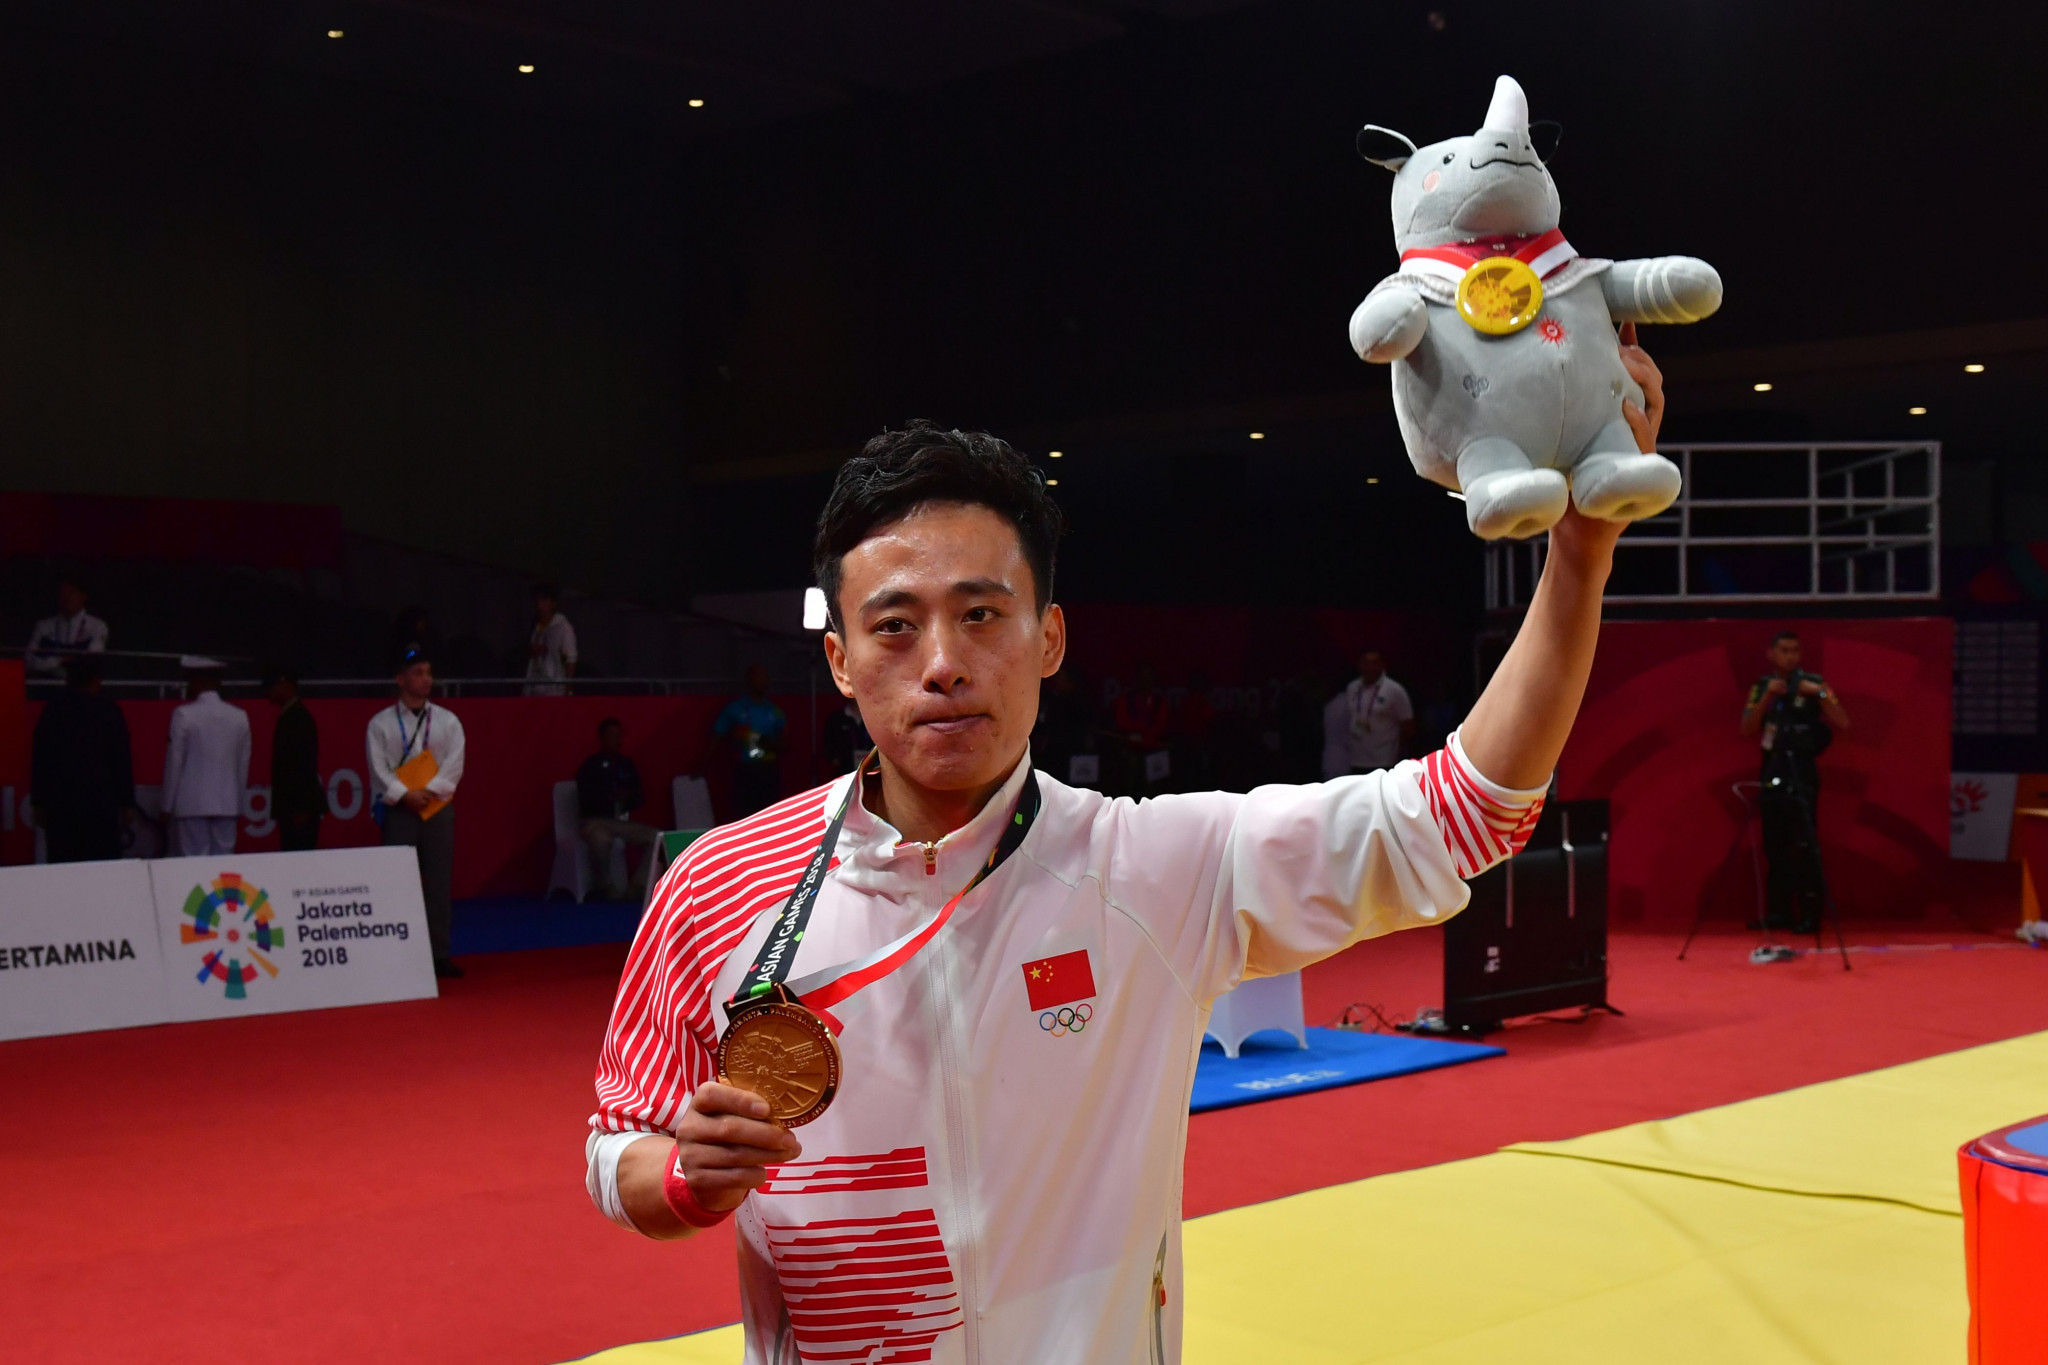 China’s Sun Peiyuan claimed the first gold medal of the 2018 Asian Games here after winning the men's changquan event today ©Getty Images